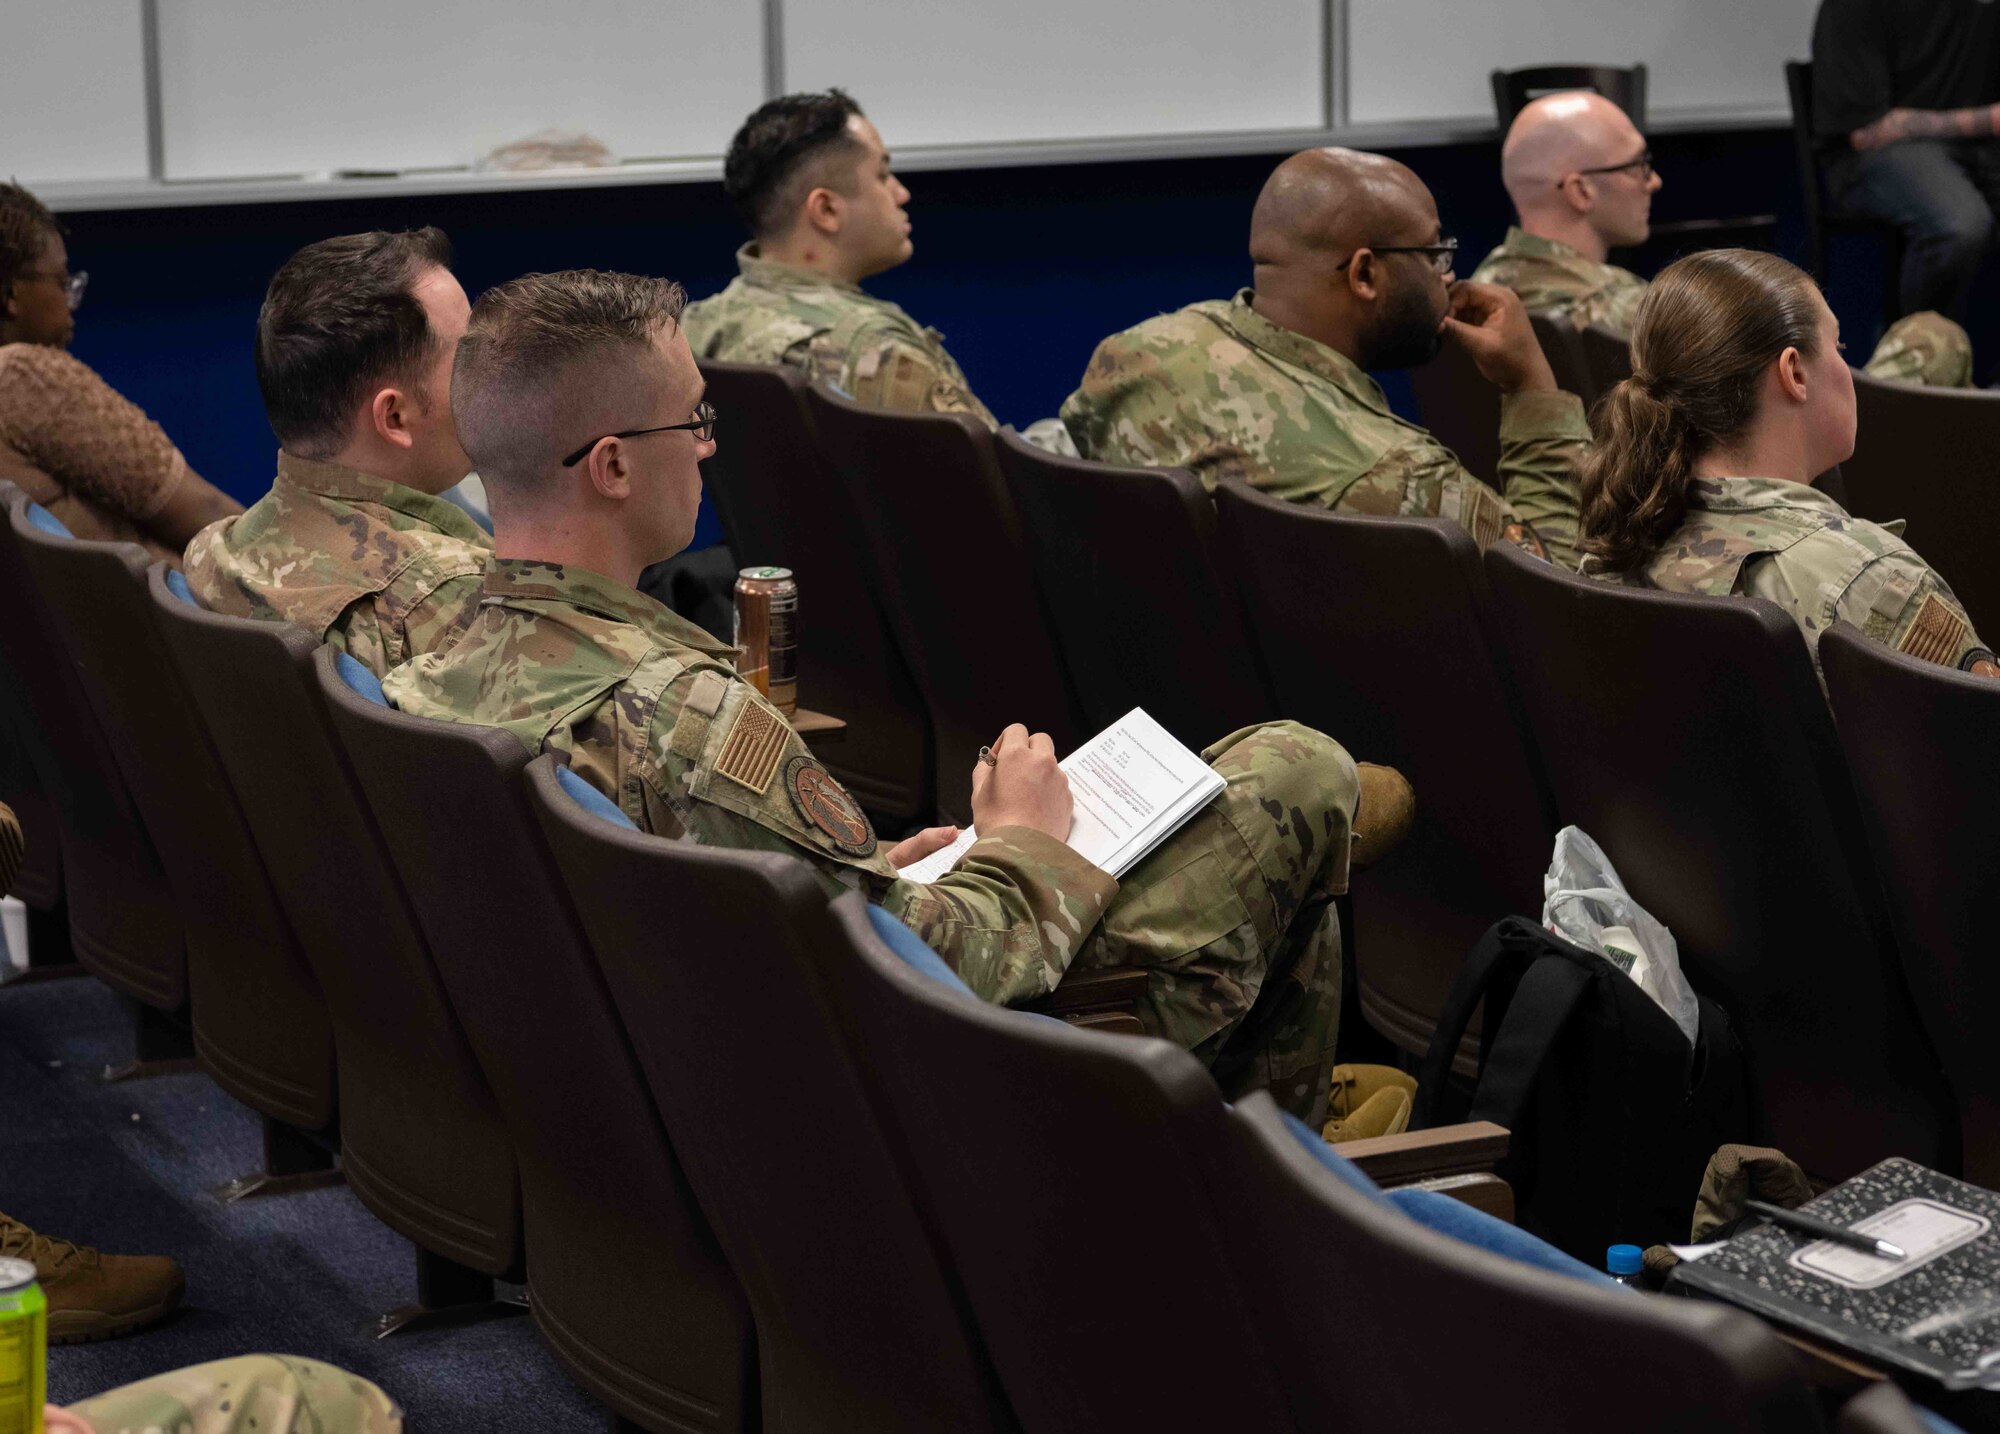 A military member writes on a notepad during an explanation.